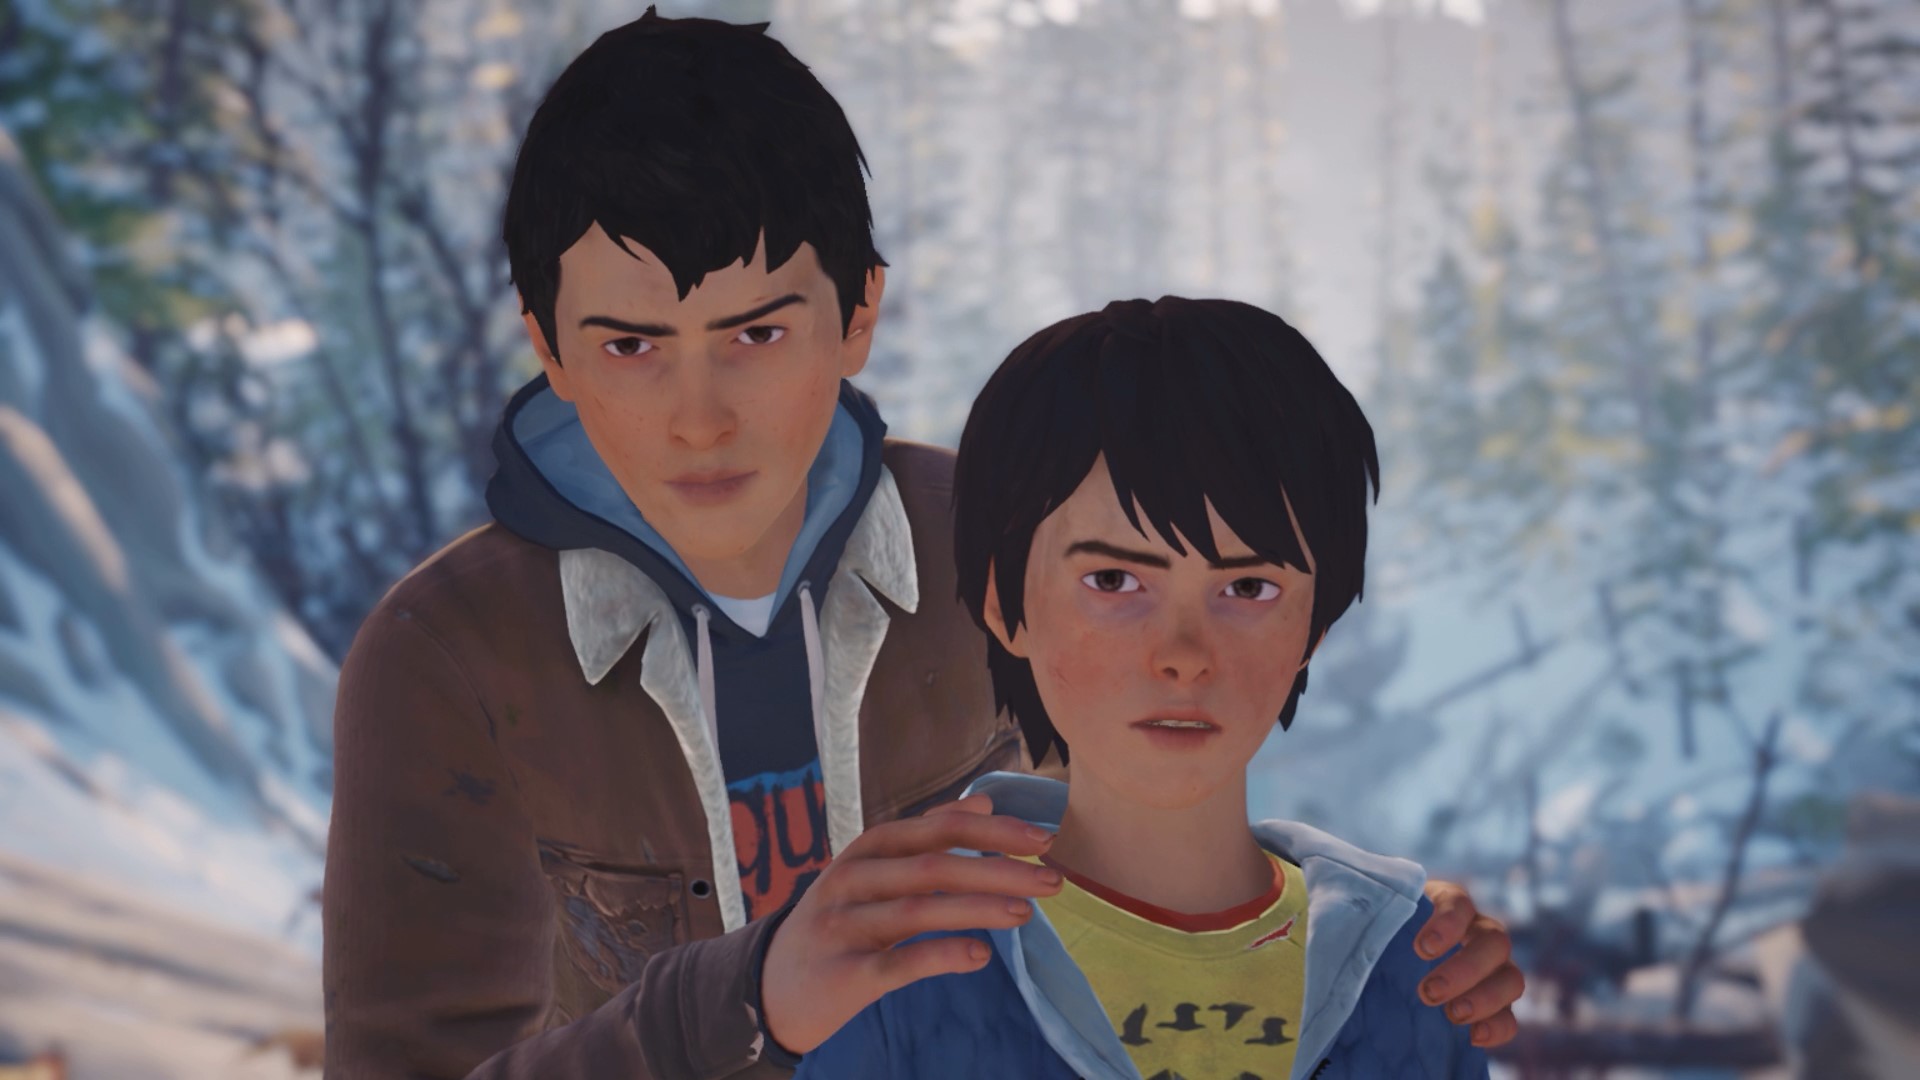 A screenshot from Life is Strange 2 on Nintendo Switch. Sean is standing on the left, with his hands on Daniel's (he's on the left) shoulders.